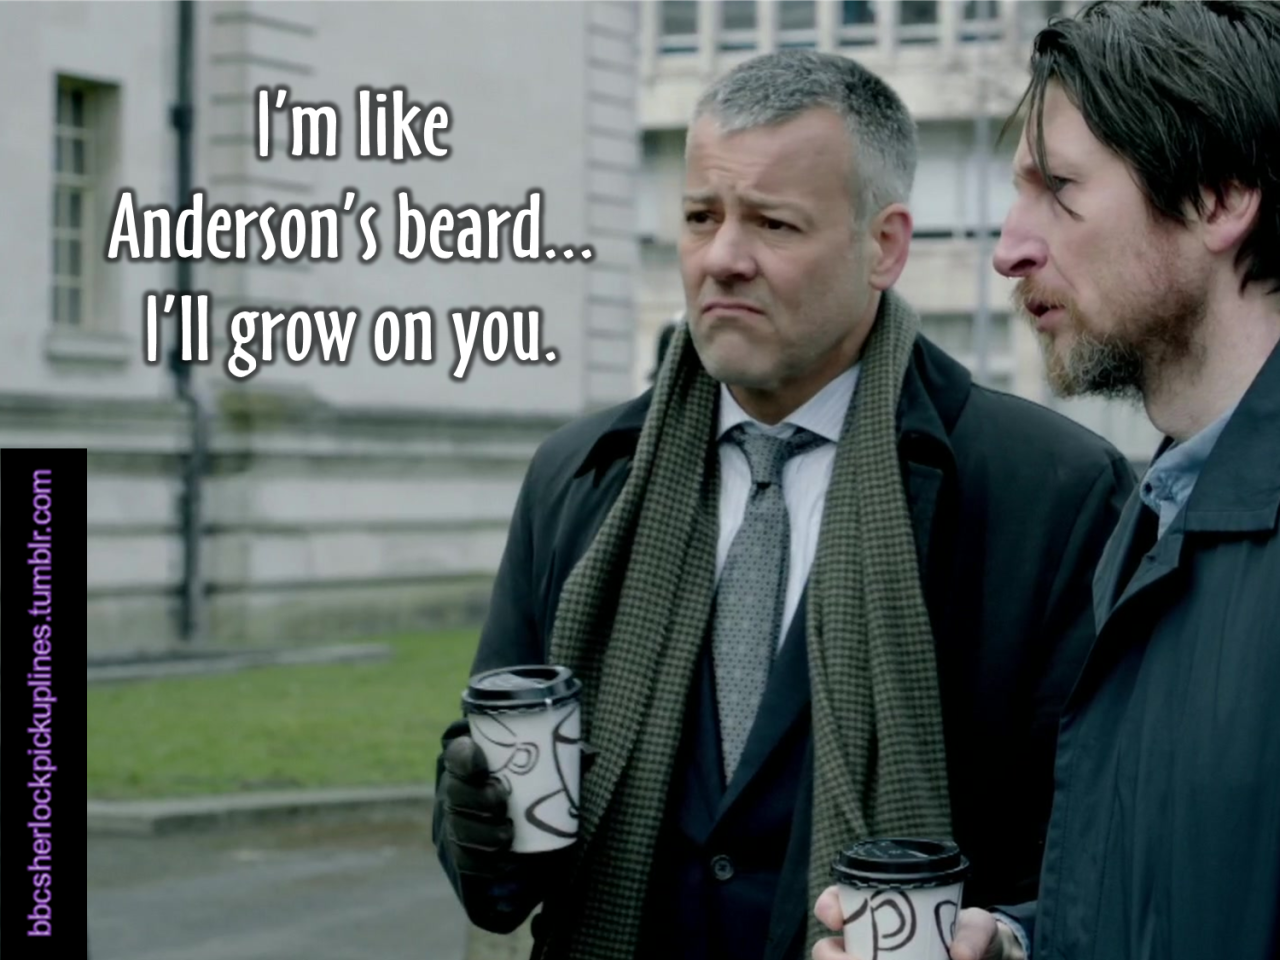 &ldquo;I&rsquo;m like Anderson&rsquo;s beard&hellip; I&rsquo;ll